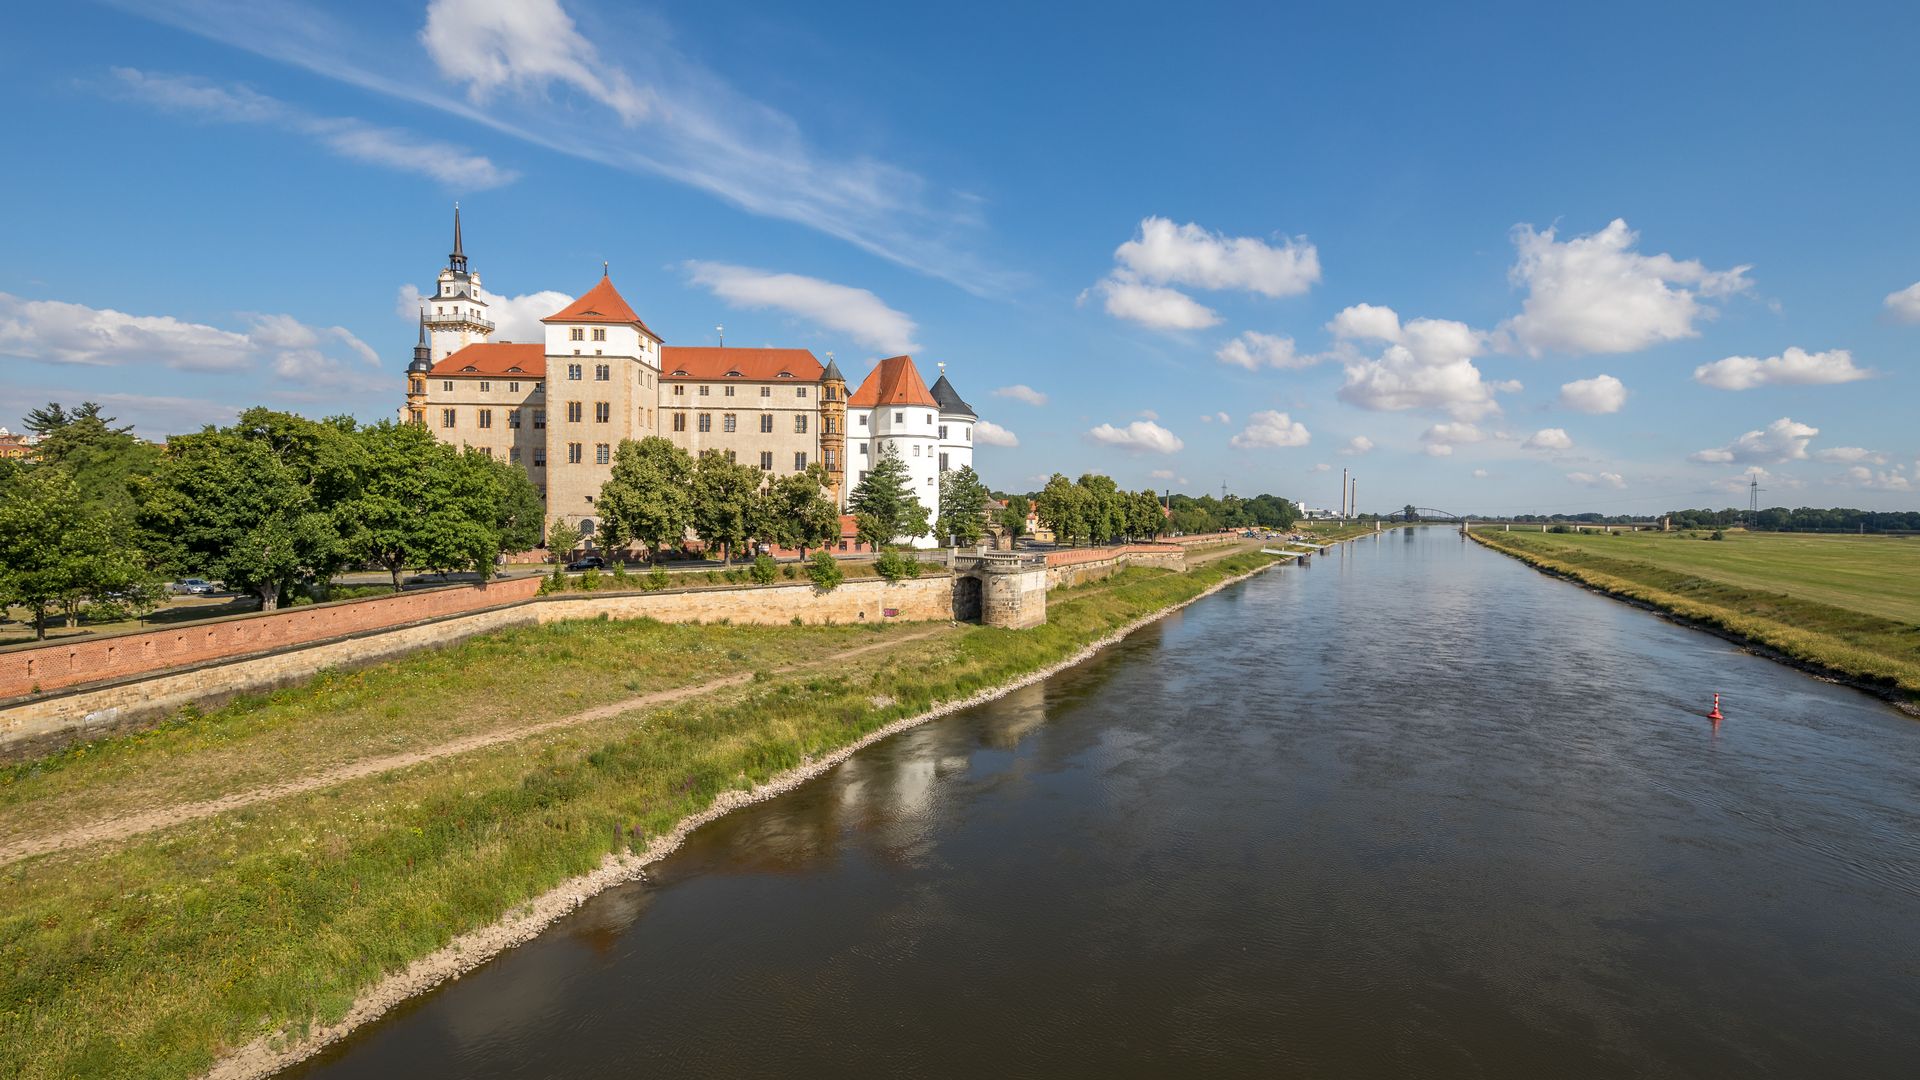 Hartenfels Castle in Torgau is located on the banks of the river Elbe.